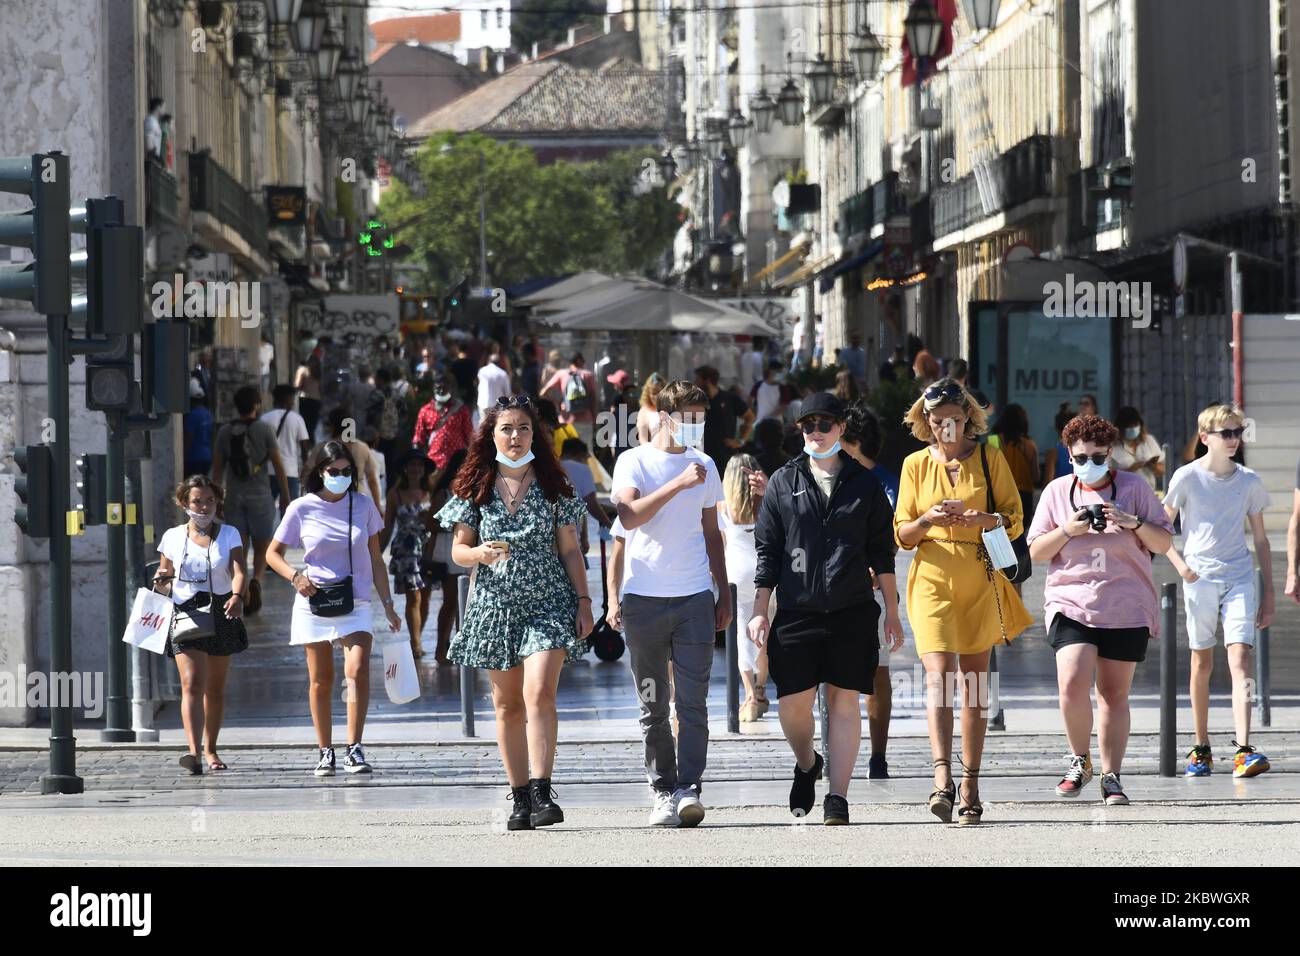 Tourists wearing protective masks walk near Praça de Comércio, Lisbon. July 31th, 2020. Health Minister Marta Temido reported that there are 12,864 active cases of COVID-19 disease in Portugal, including outbreak-related infections. In total there are 194 active outbreaks in the country: 47 in the North region, 12 in the Centre, 106 in Lisbon and Tagus Valley, 14 in the Alentejo and 15 in the Algarve region. The outbreaks are considered active even if several days have passed since the last confirmed case. 'We only consider an outbreak to be extinct when 28 days (two incubation periods) have p Stock Photo